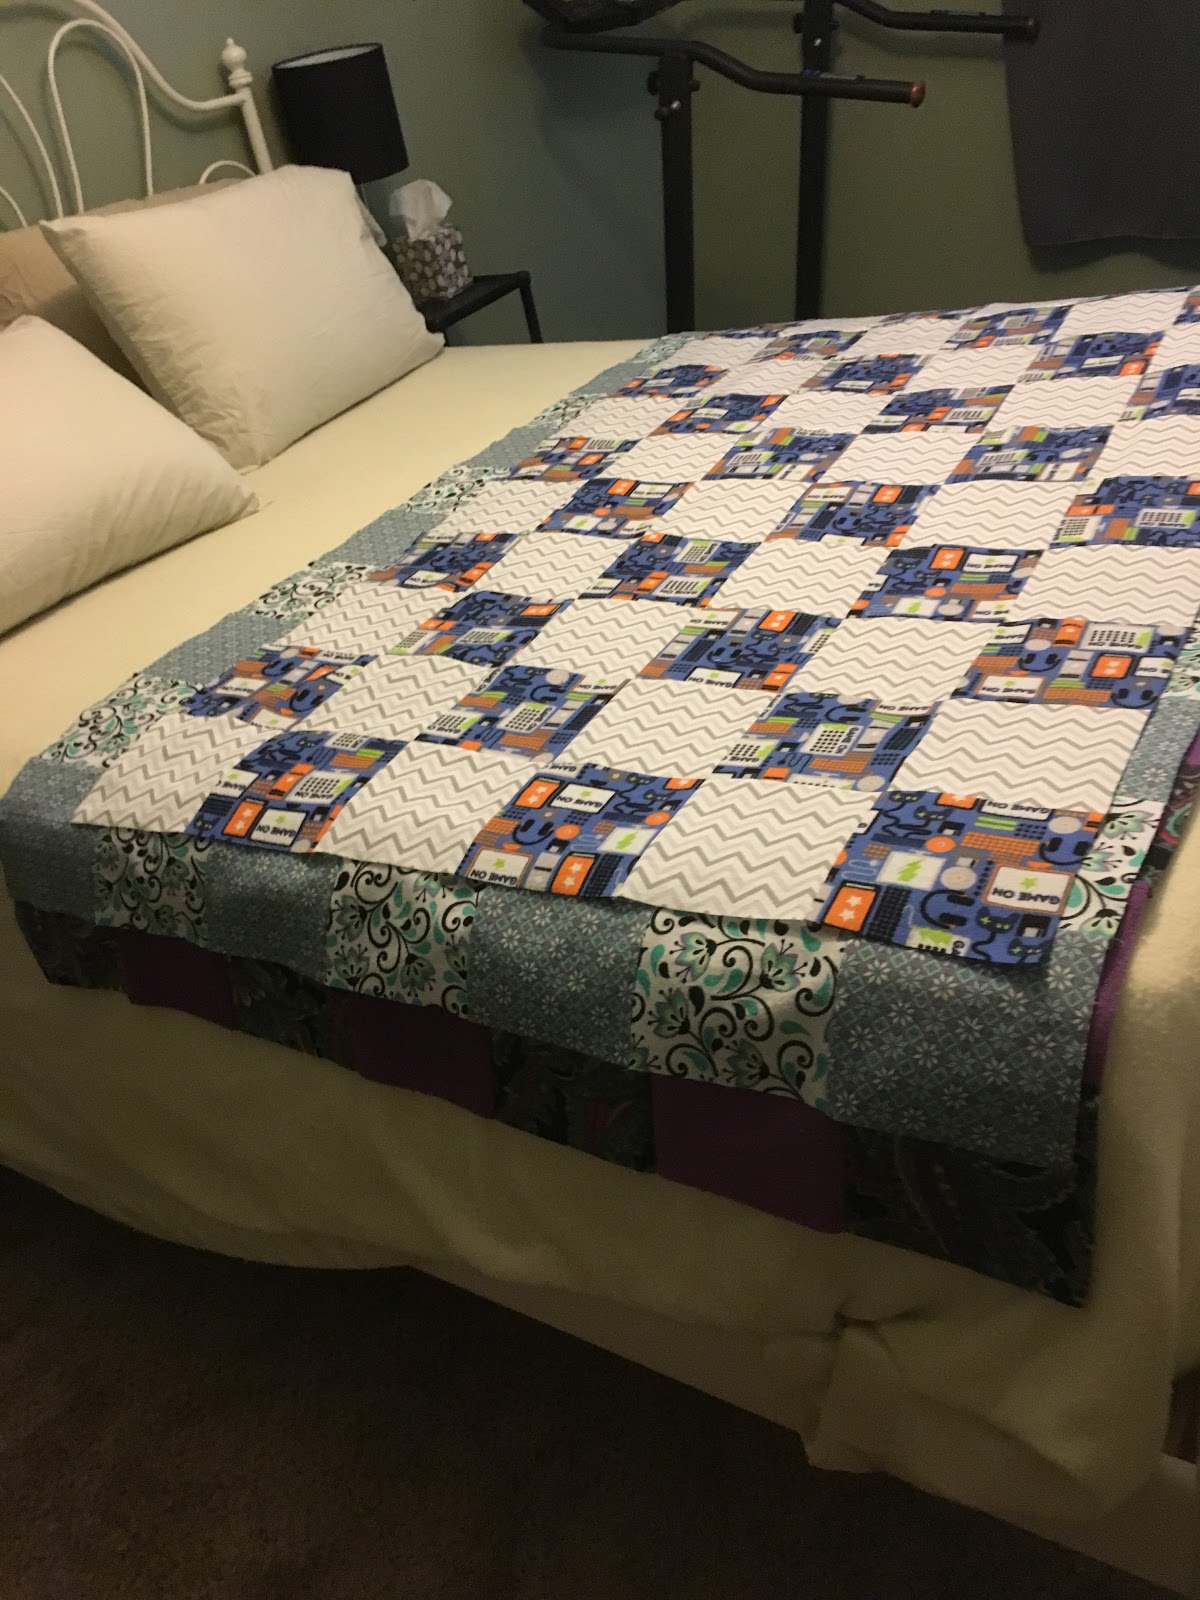 In the desert: Two Color Quilt???